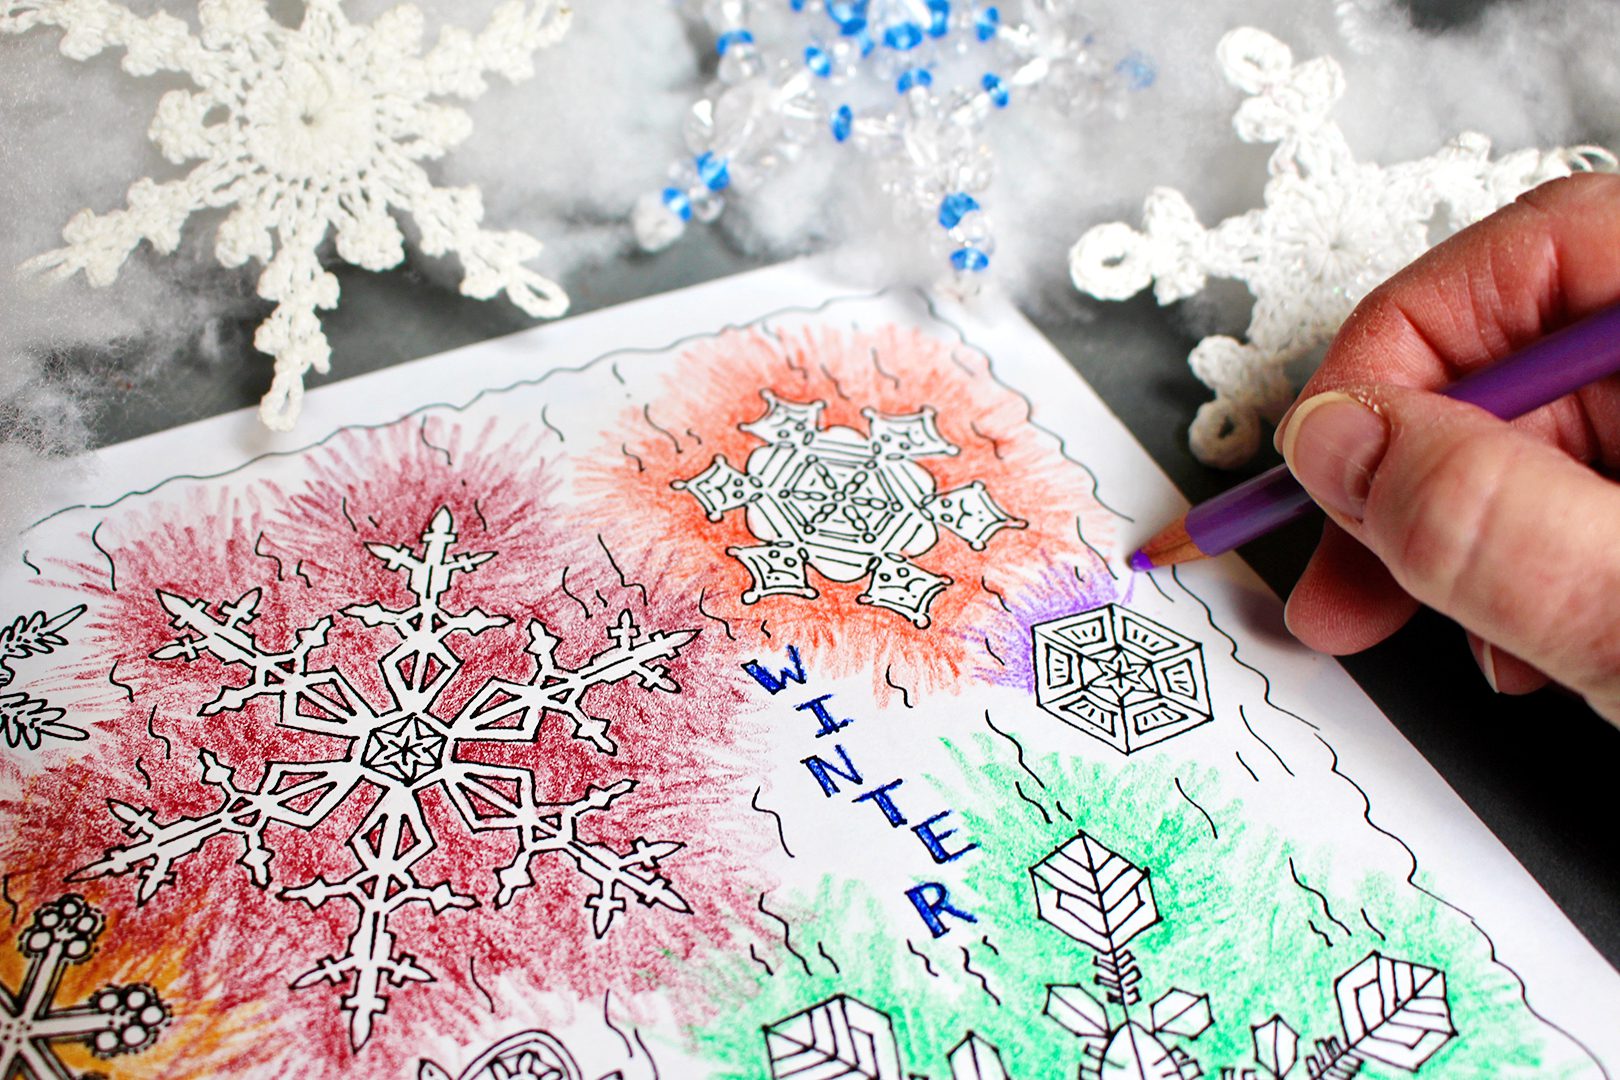 Coloring red, orange, green, and purple snowflakes with a purple colored pencil.